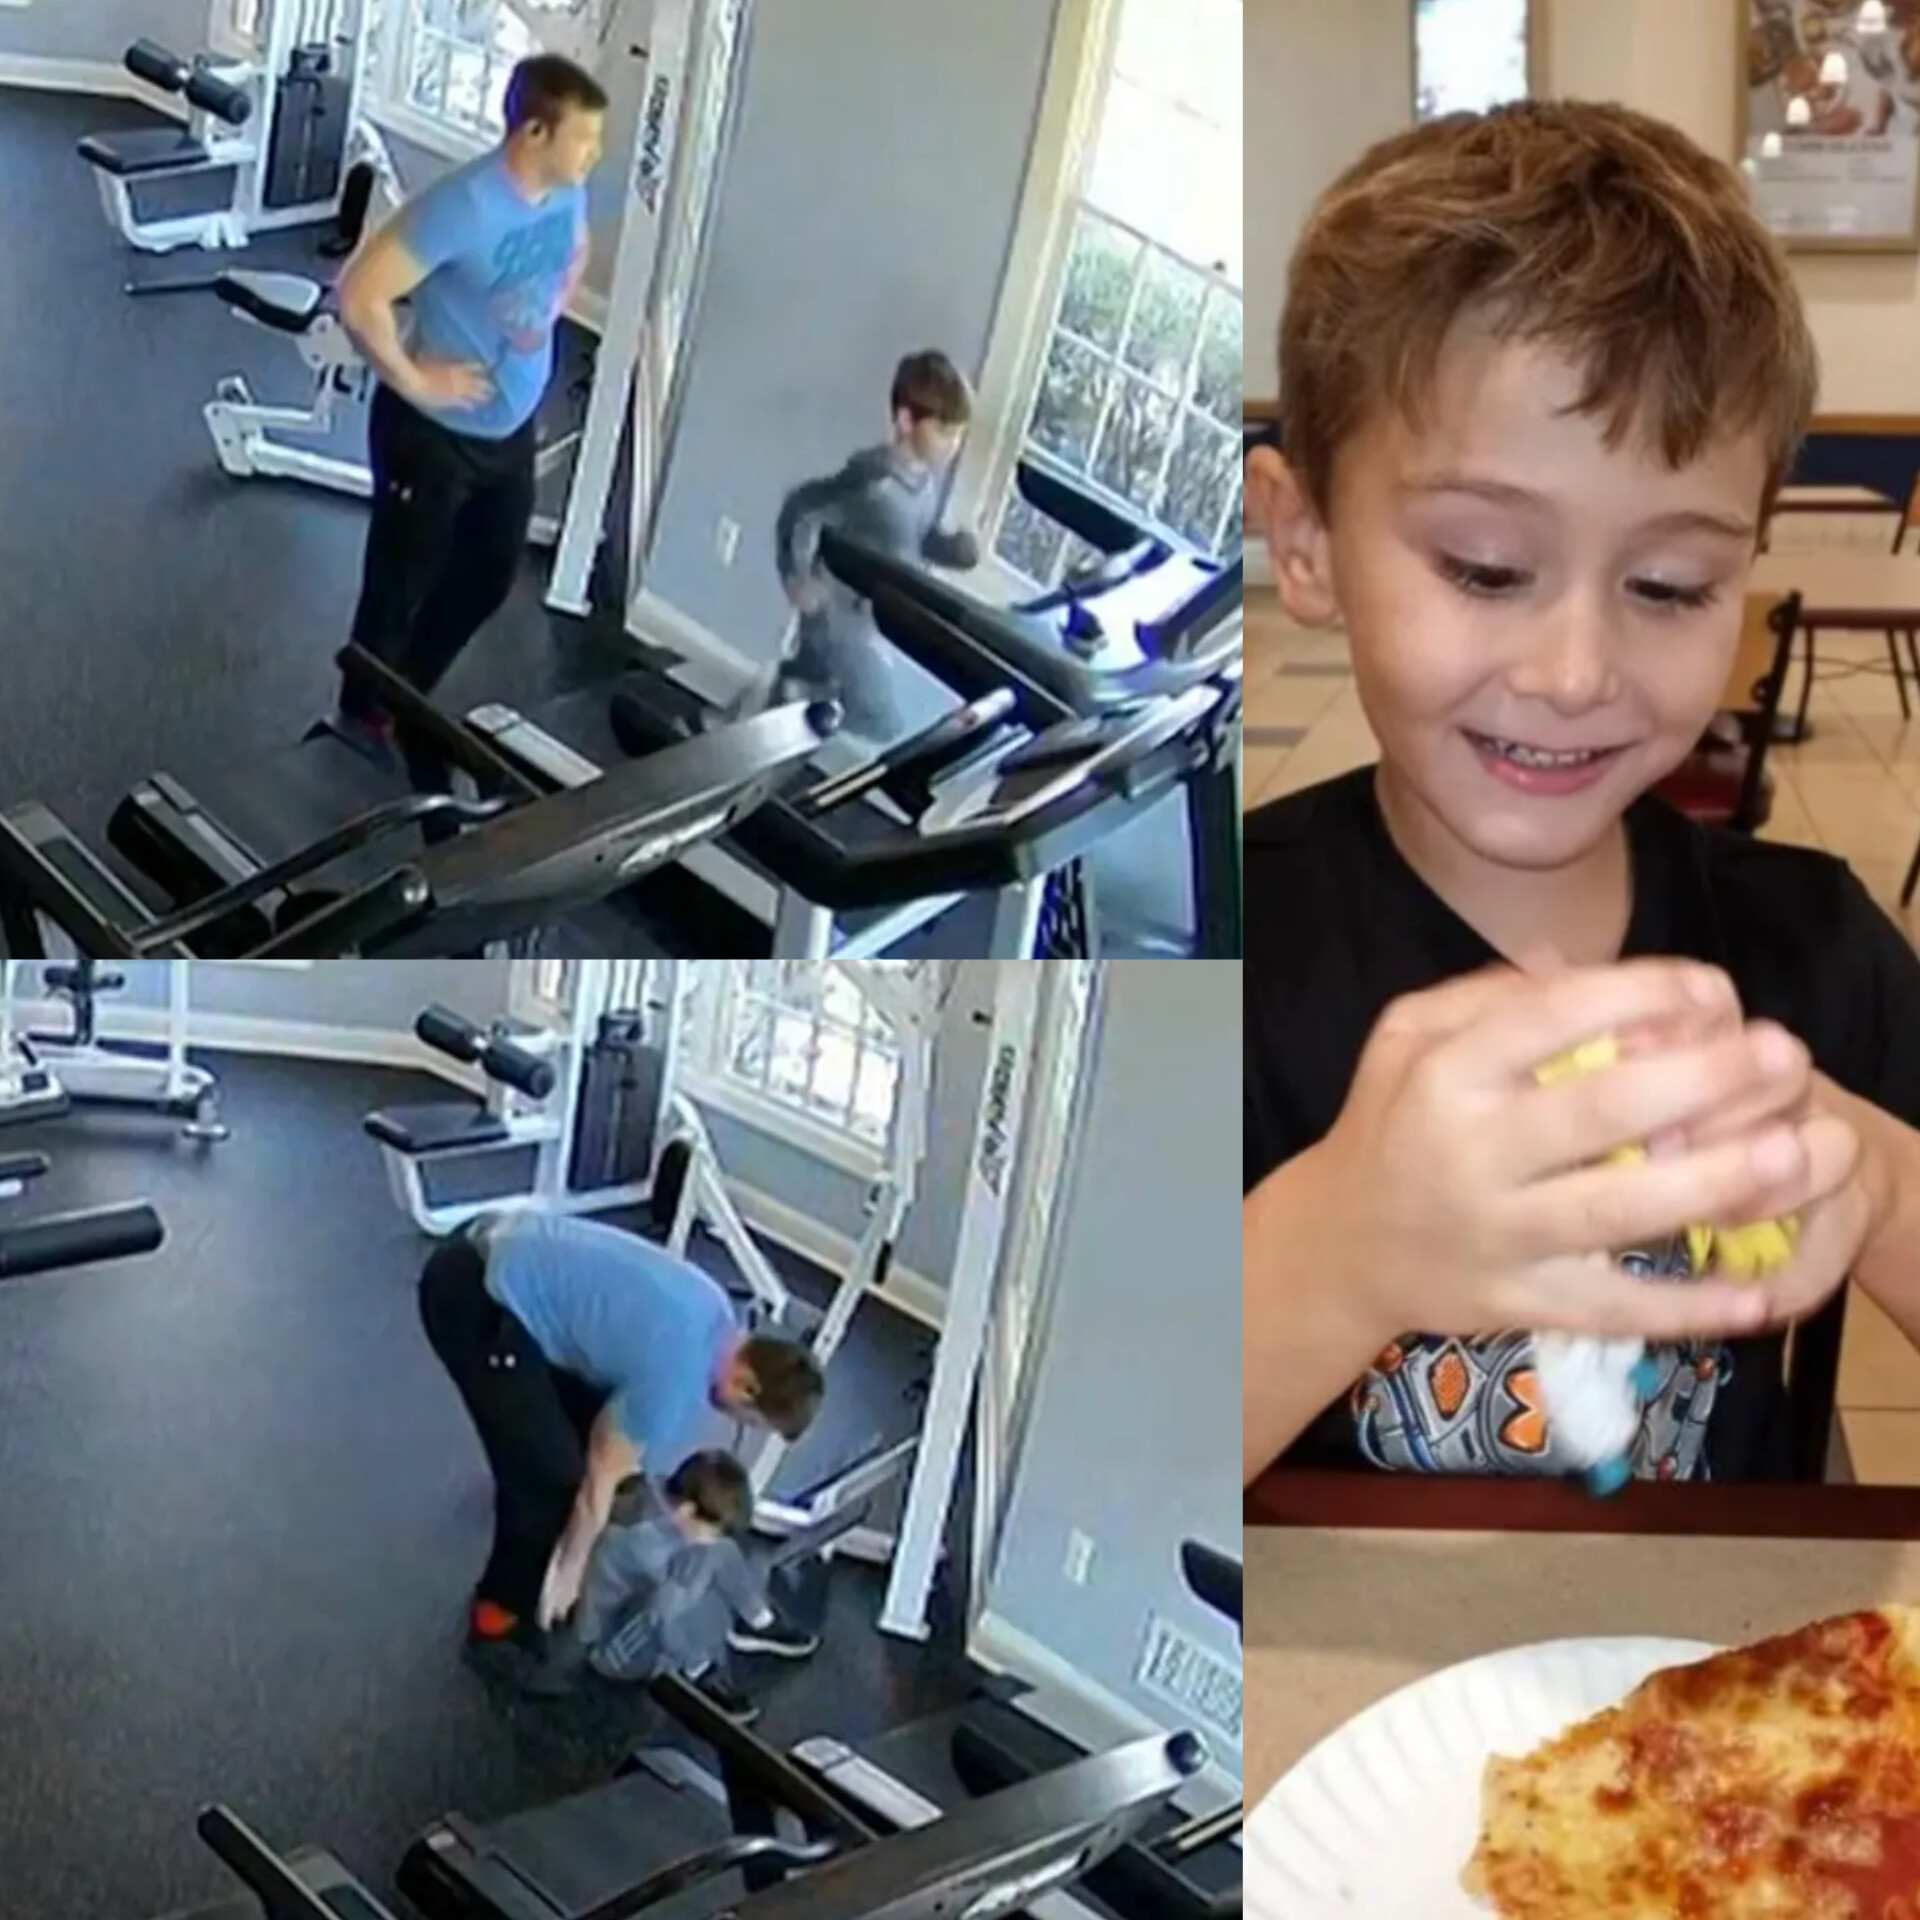 Watch video showing alleged killer dad forcing his 6-year-old son to run repeatedly on treadmill because he was ?too fat?